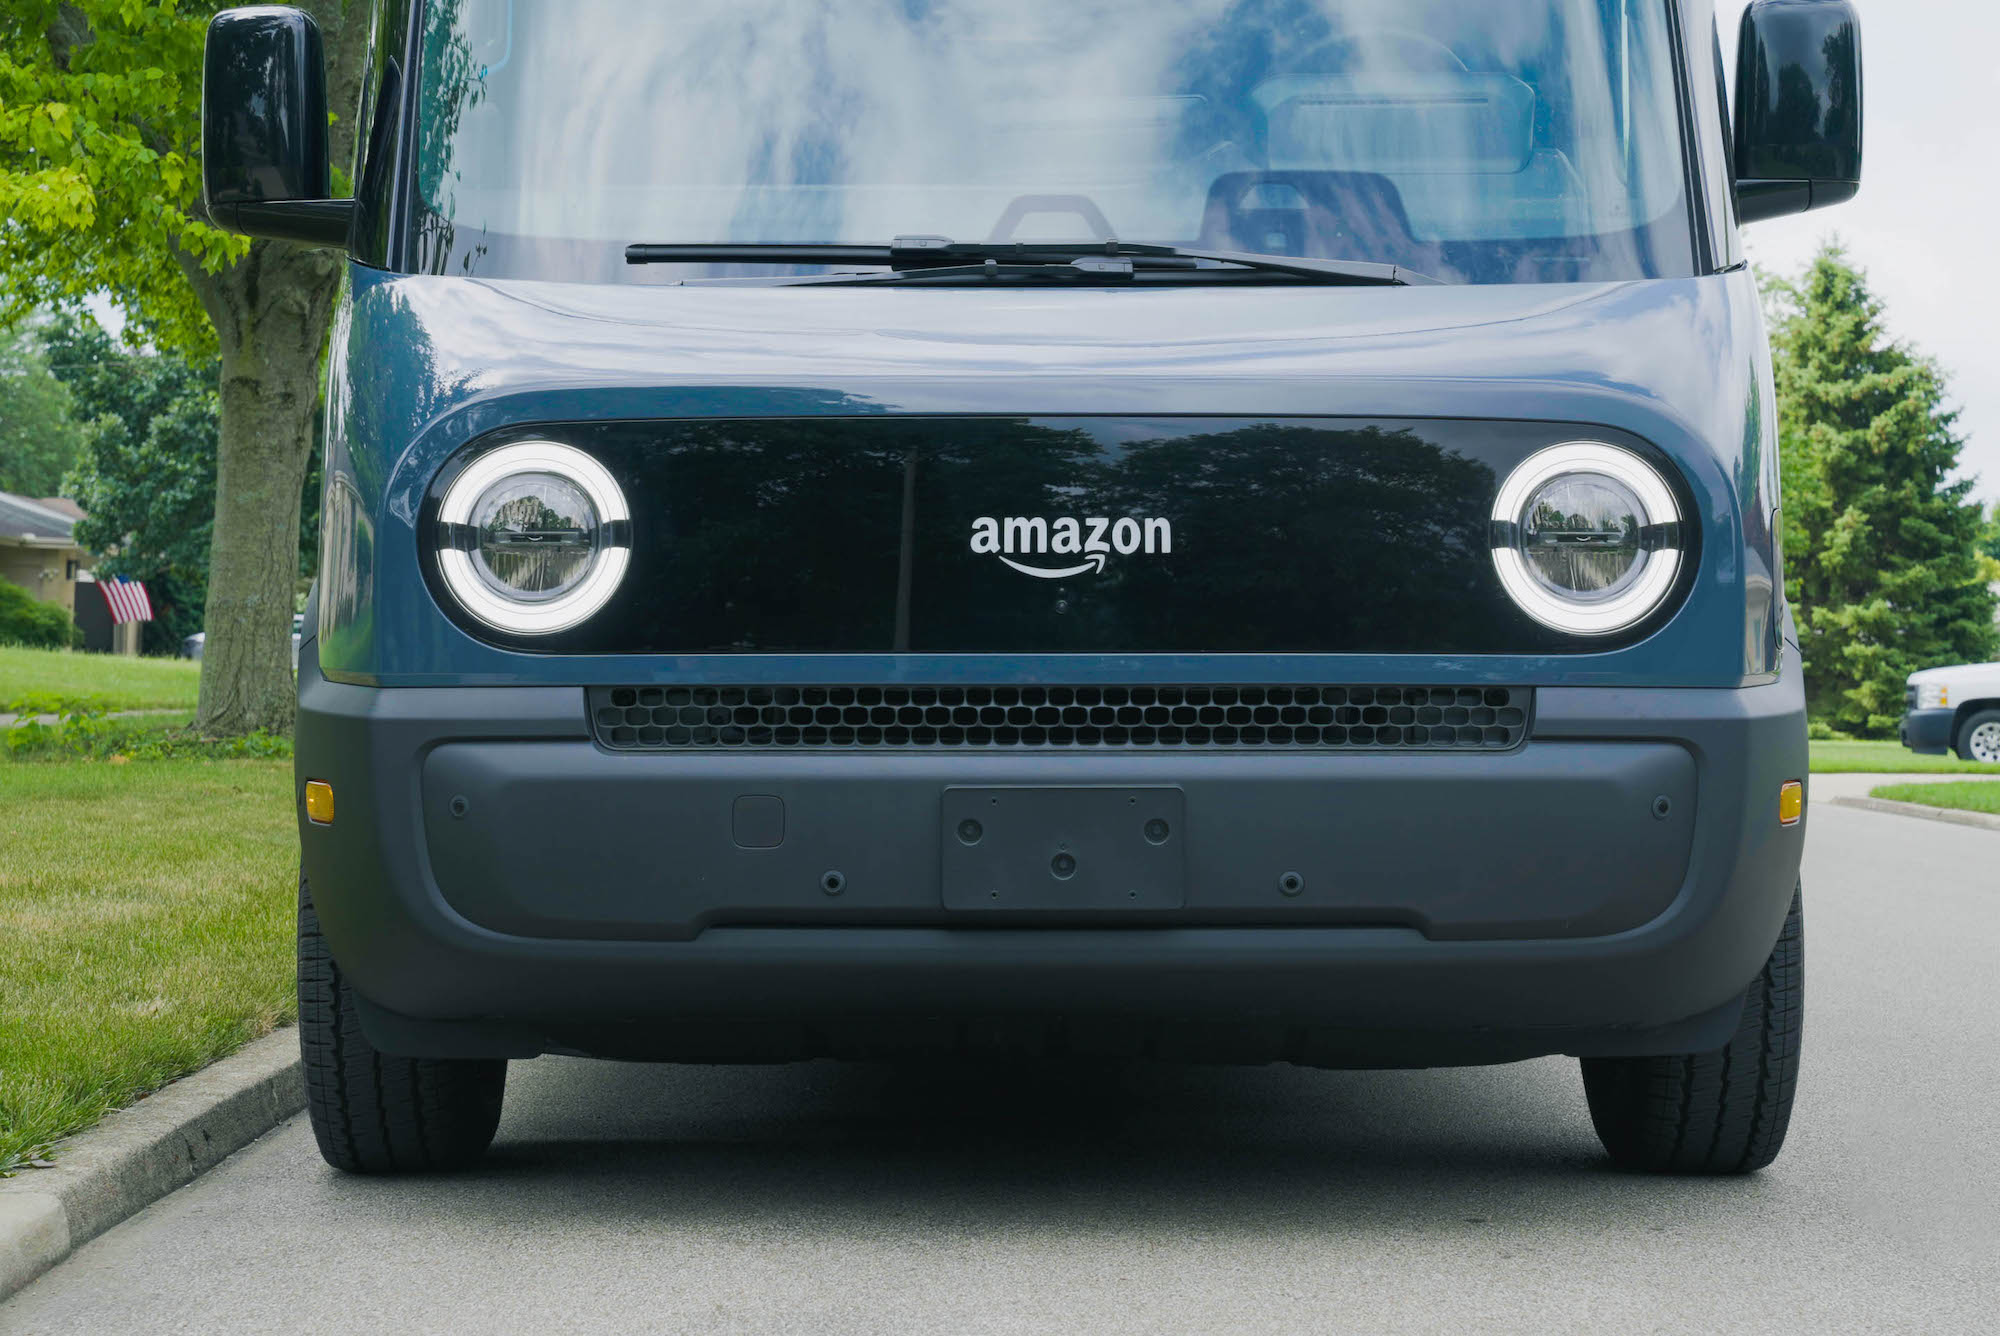 Rivian in talks with Amazon to remove exclusivity clause of EV van agreement